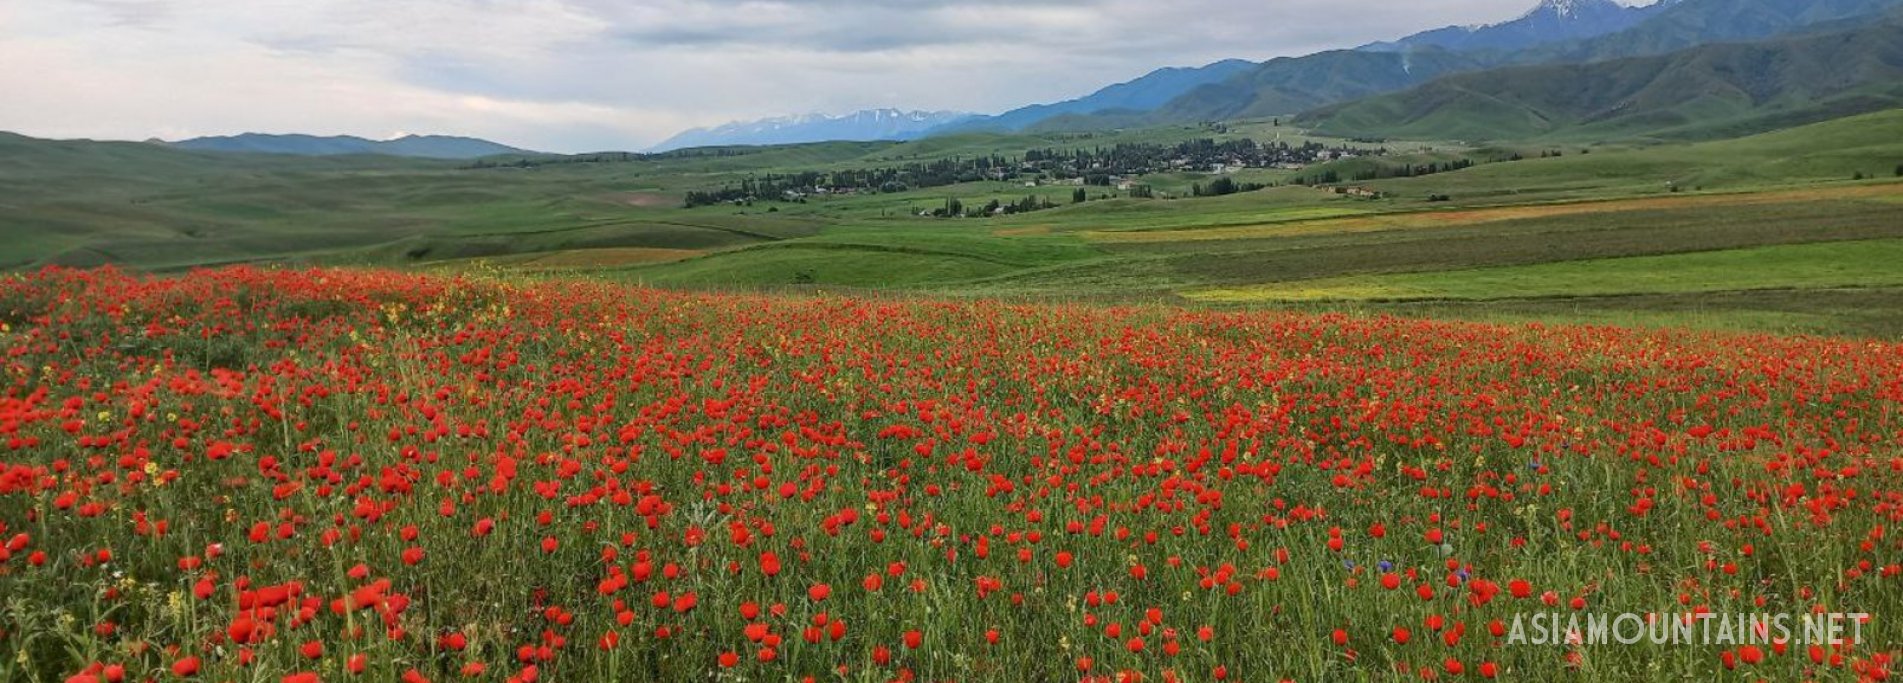 How lucky we are to see poppy fields in June